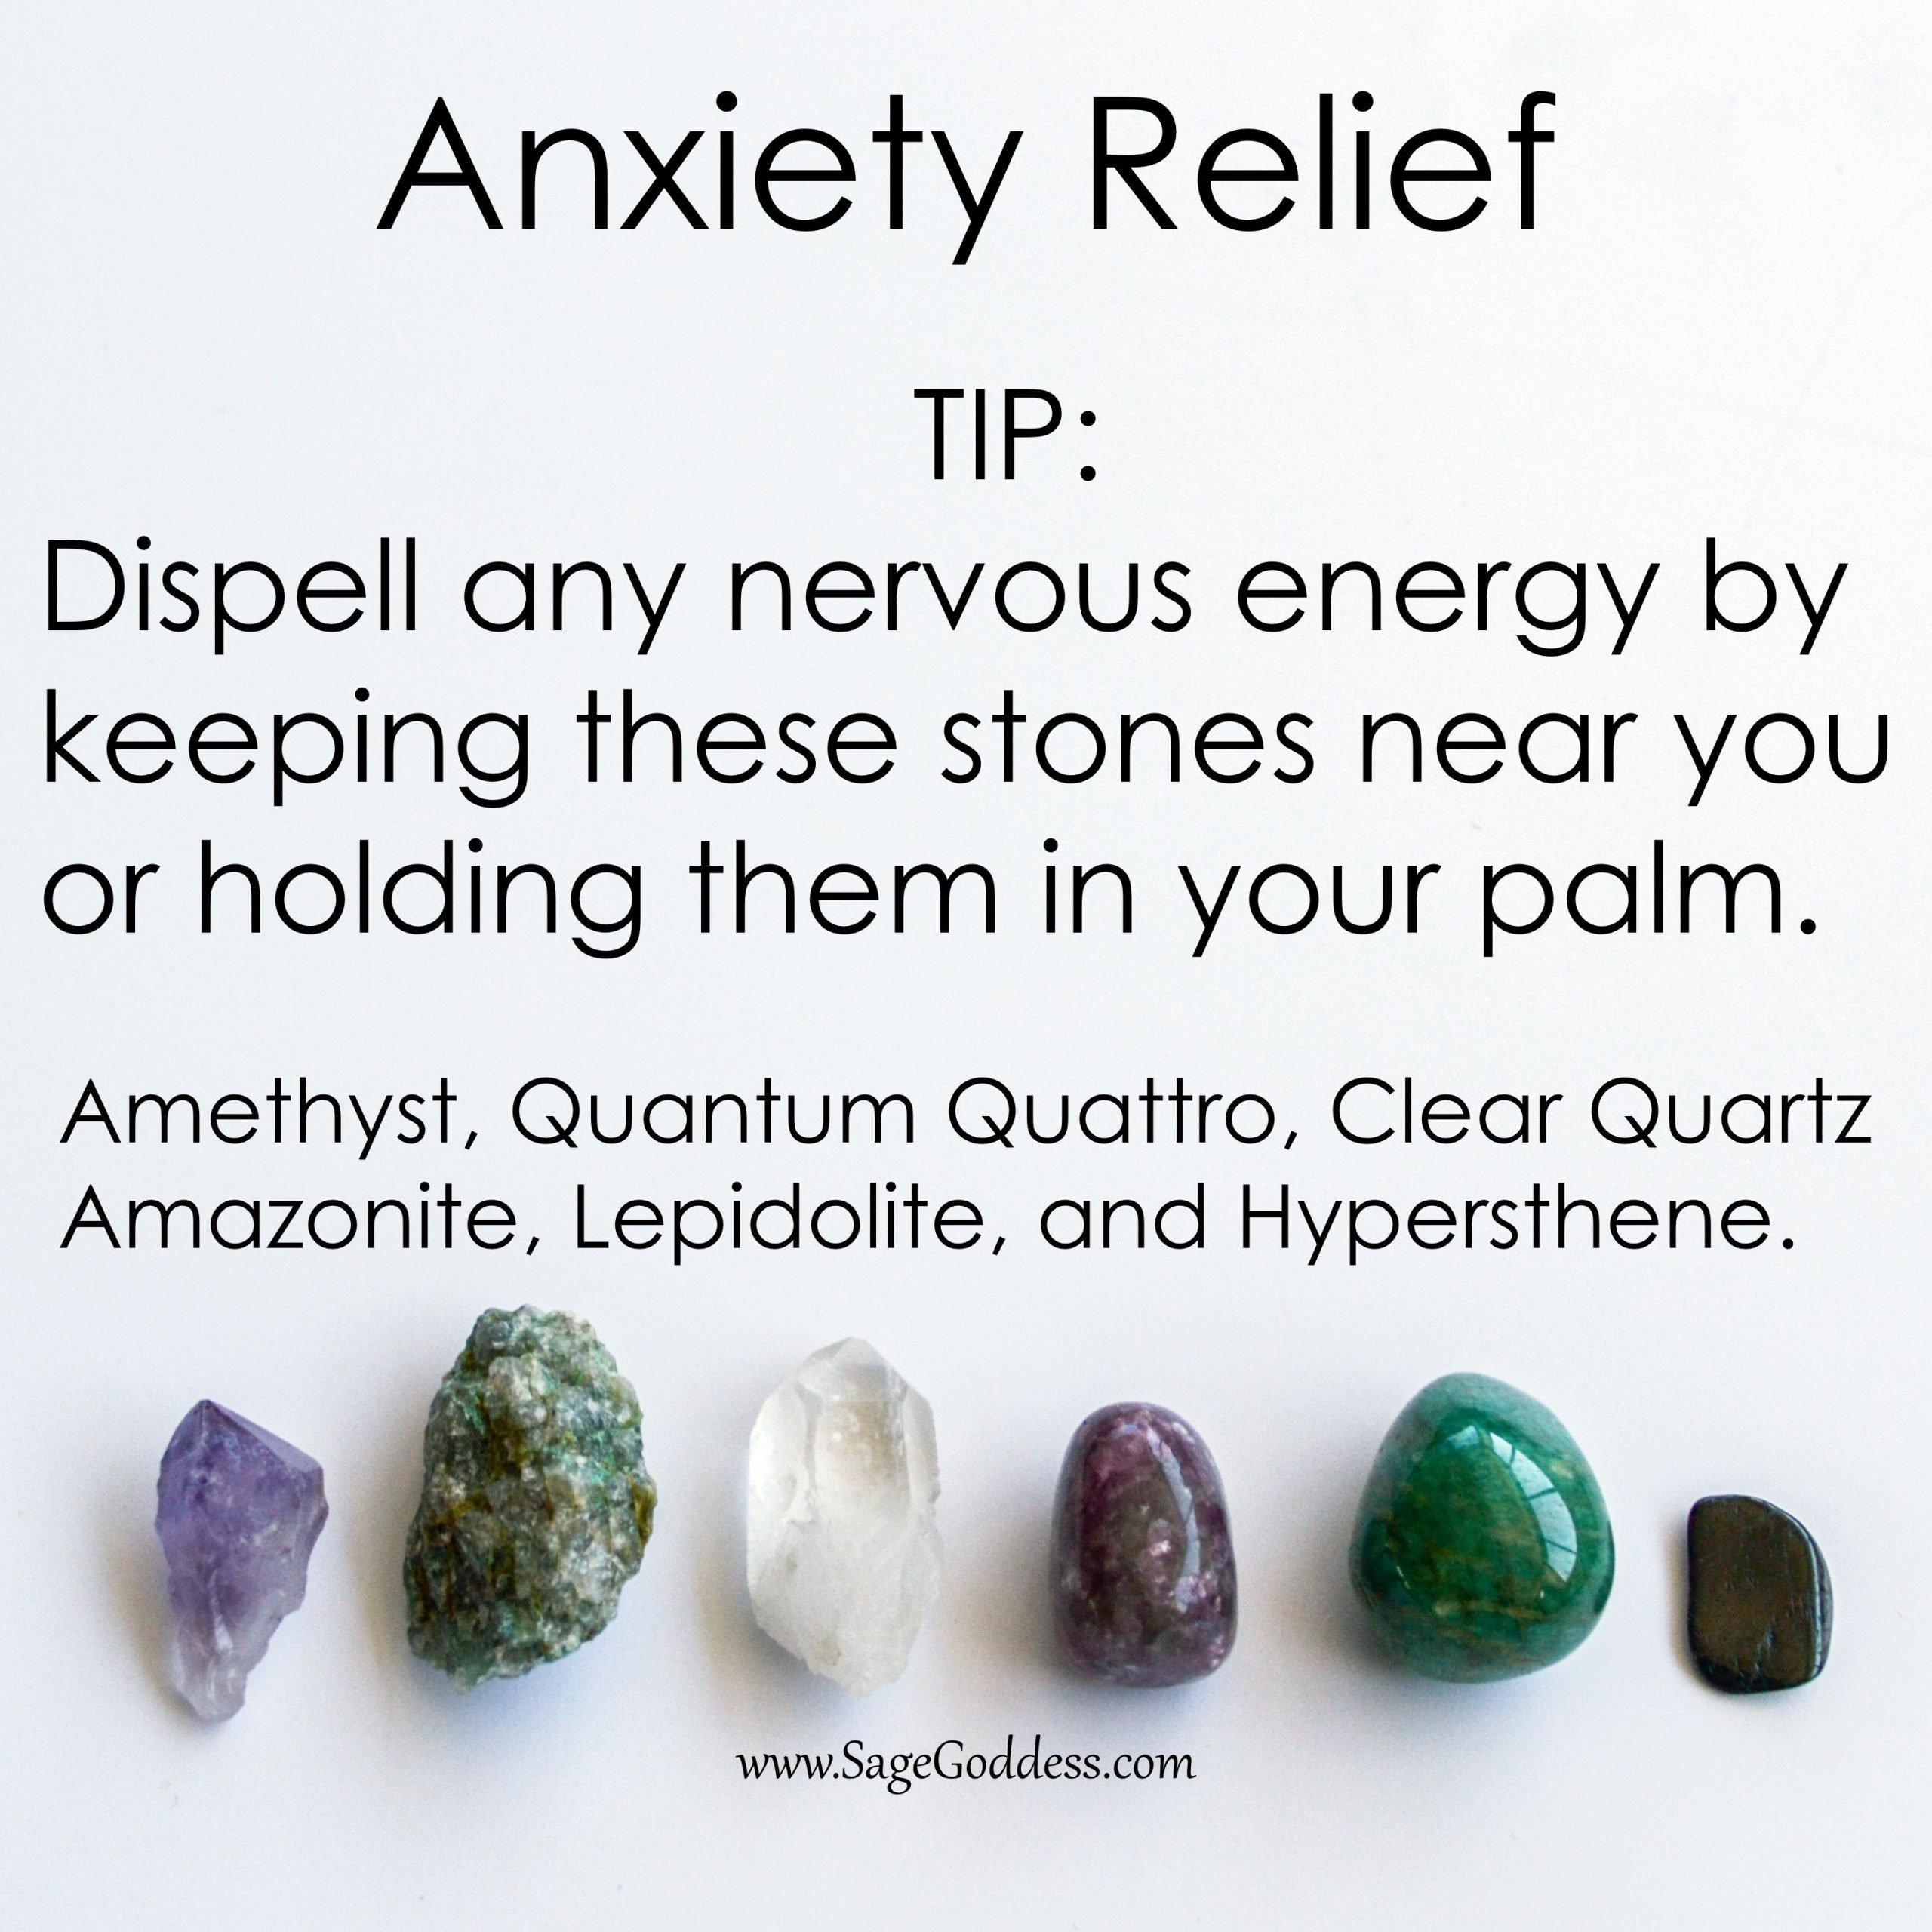 Dispell Any Nervous Energy By Keeping These Stones Near You